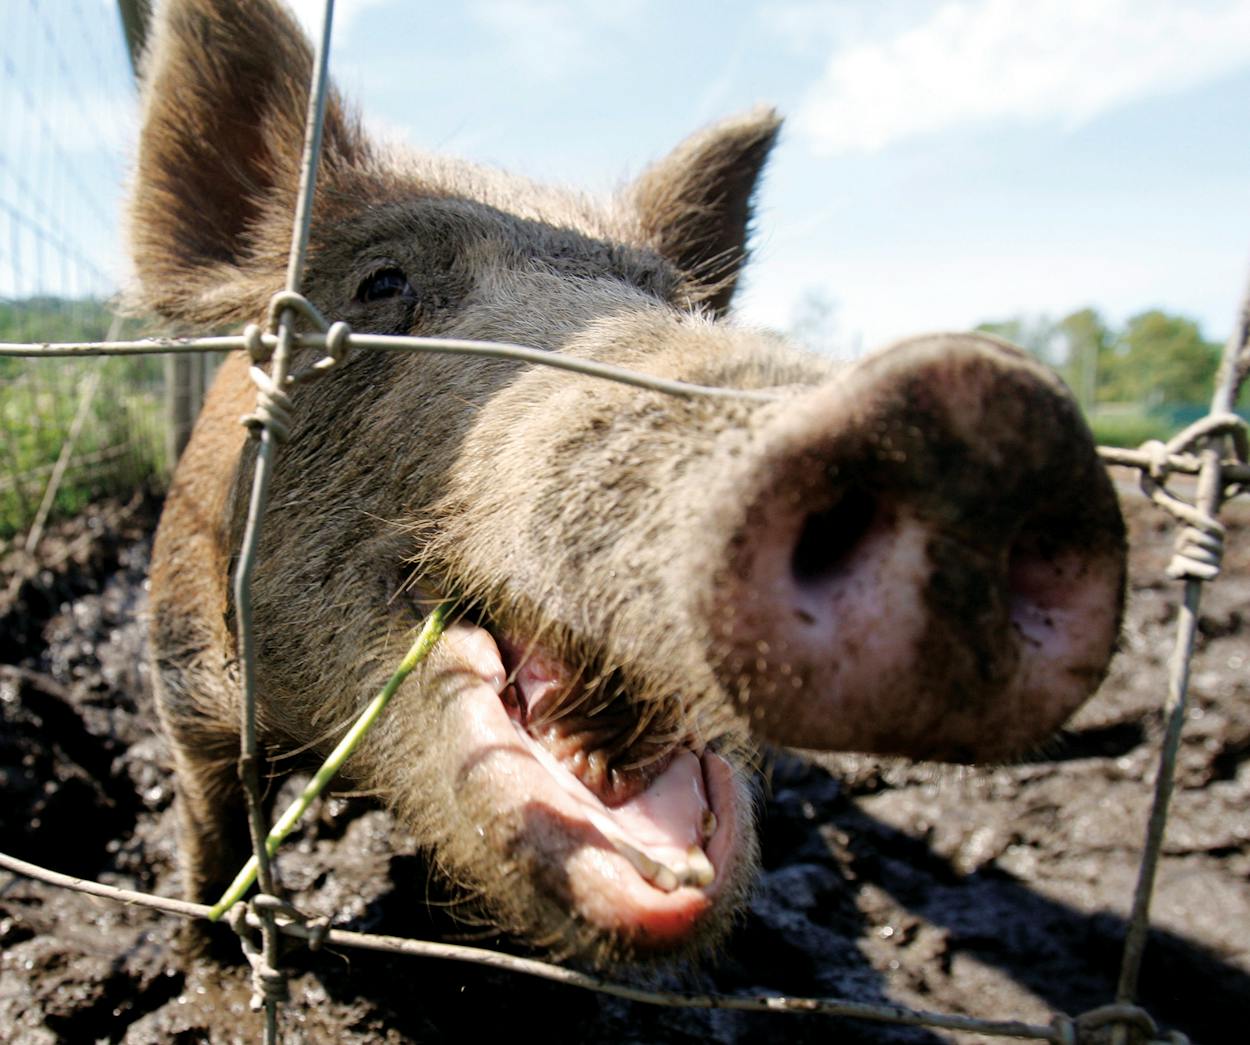 A feral hog stands in a holding pen at Easton View Outfitters in Valley Falls, NY on August 24, 2011.